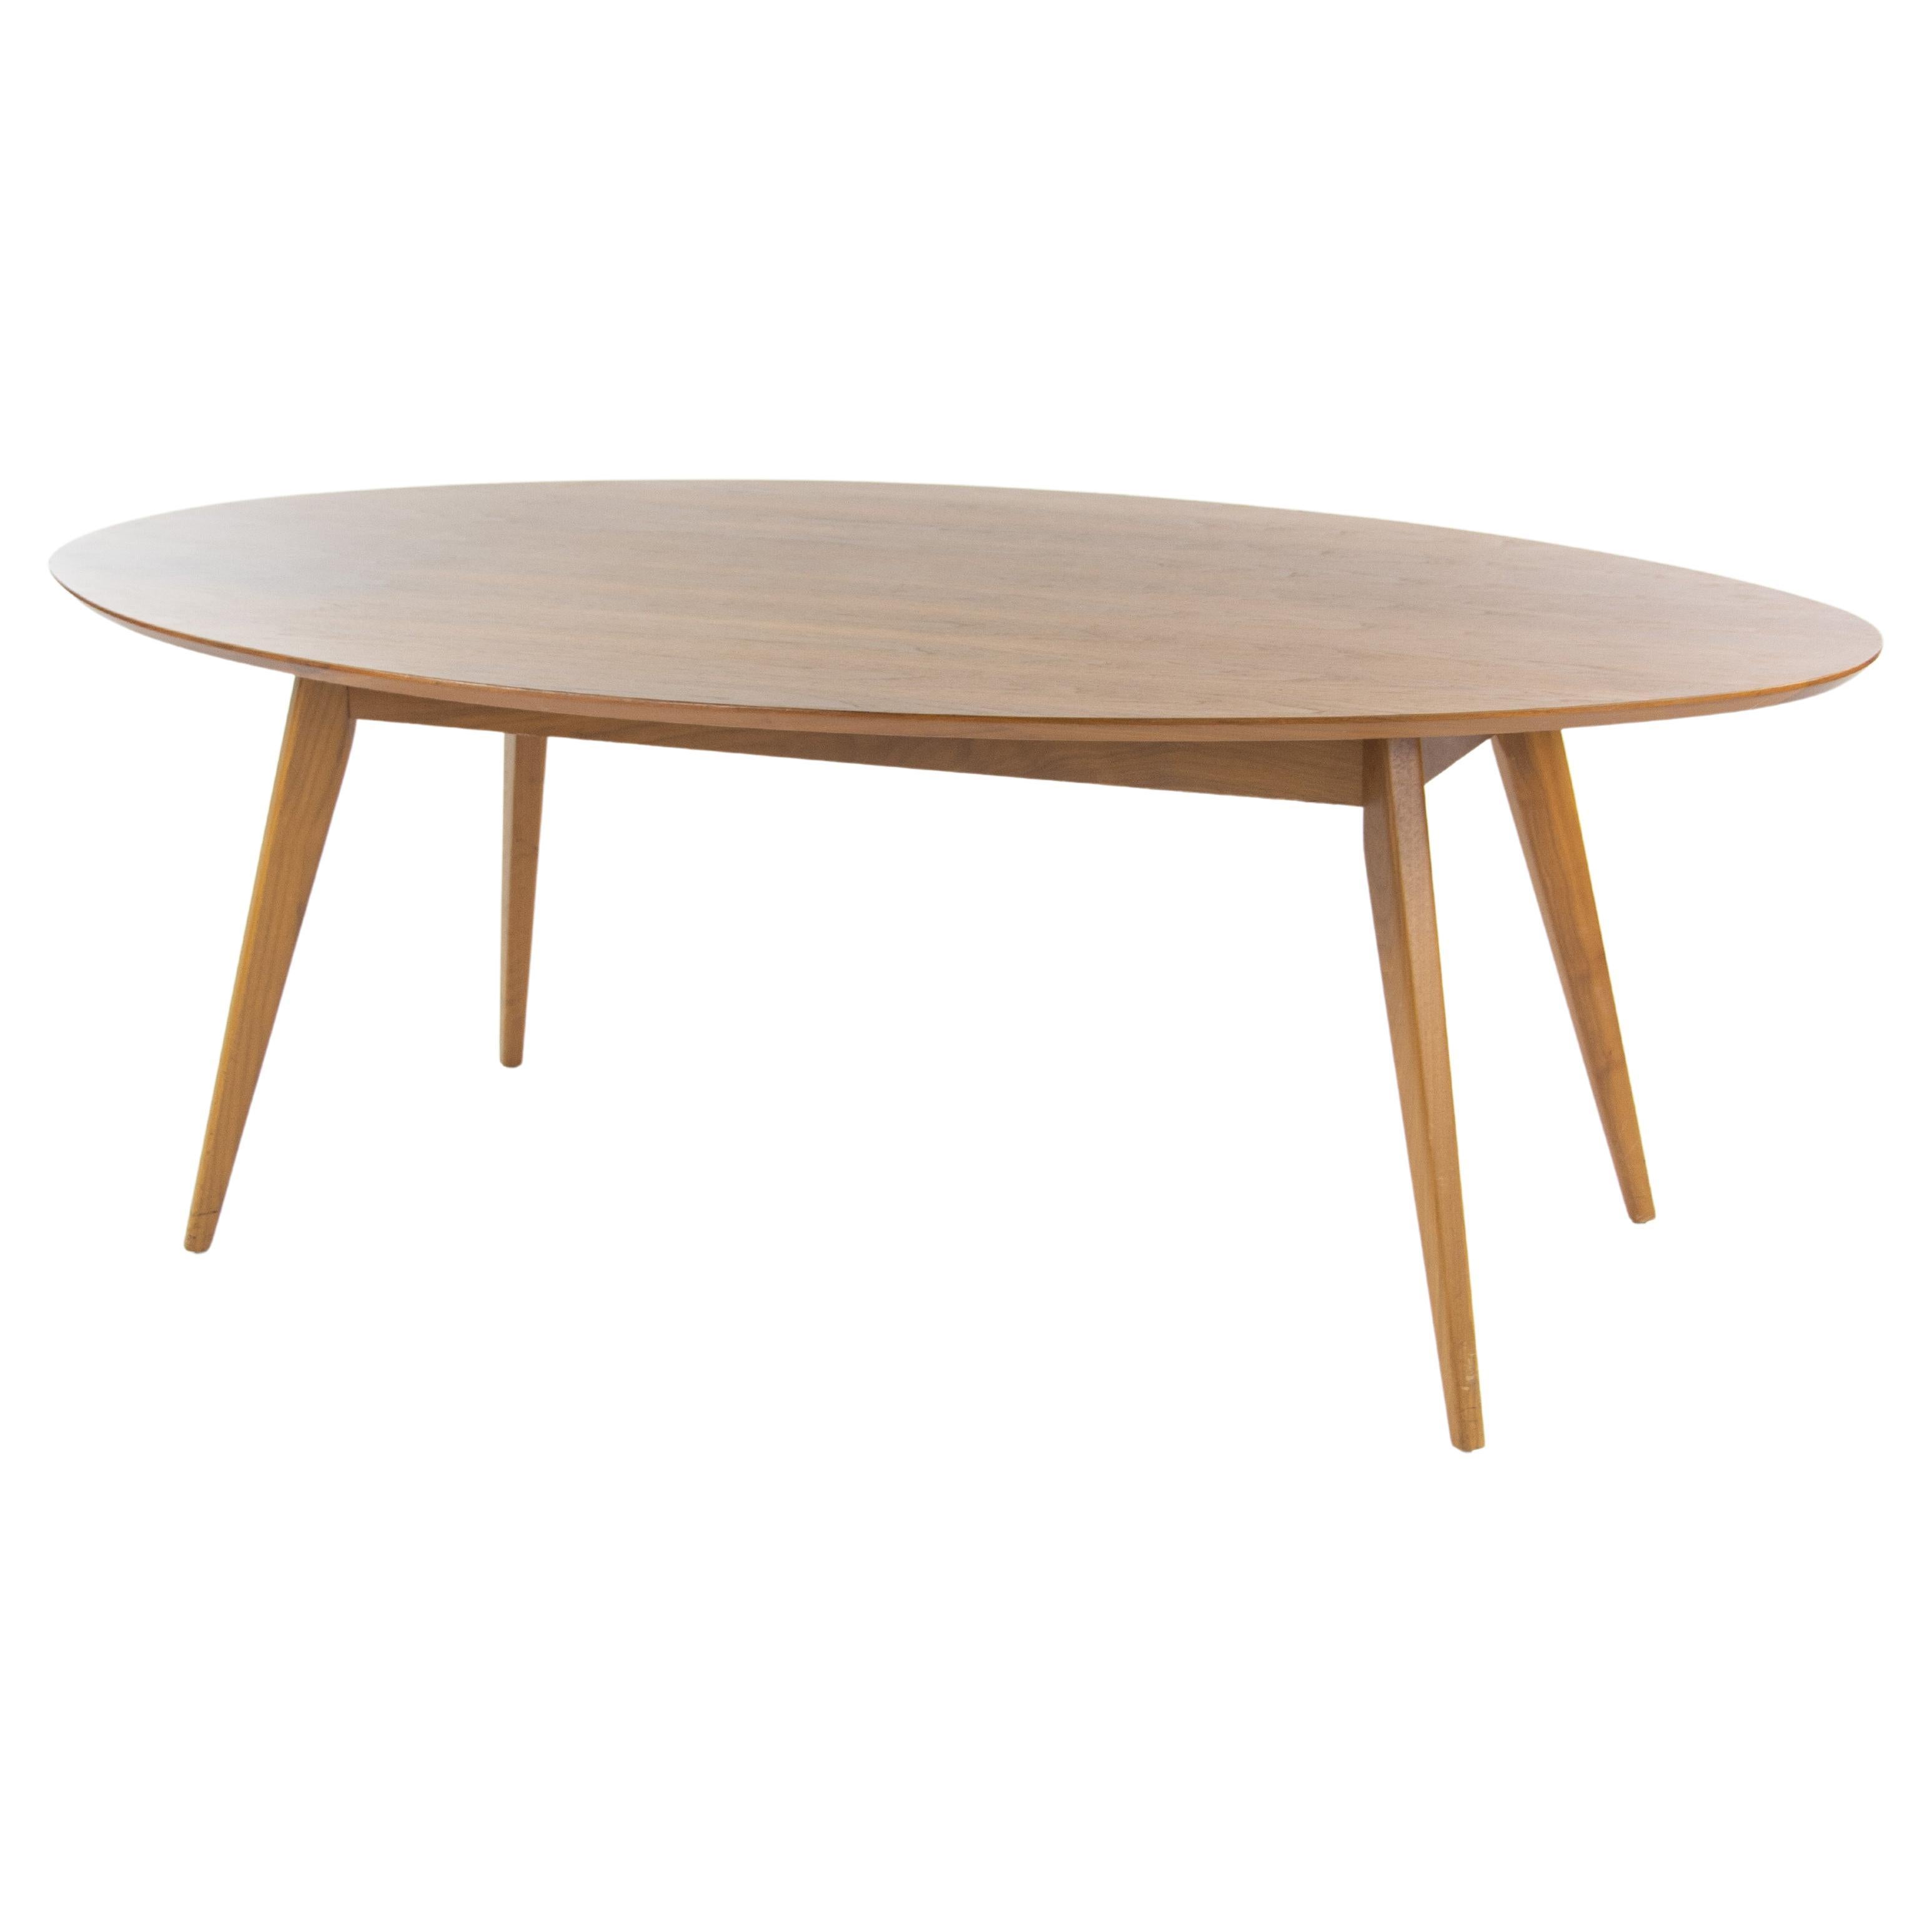 Custom Jens Risom for Knoll 78x48 inch Oval Walnut Dining / Conference Table For Sale